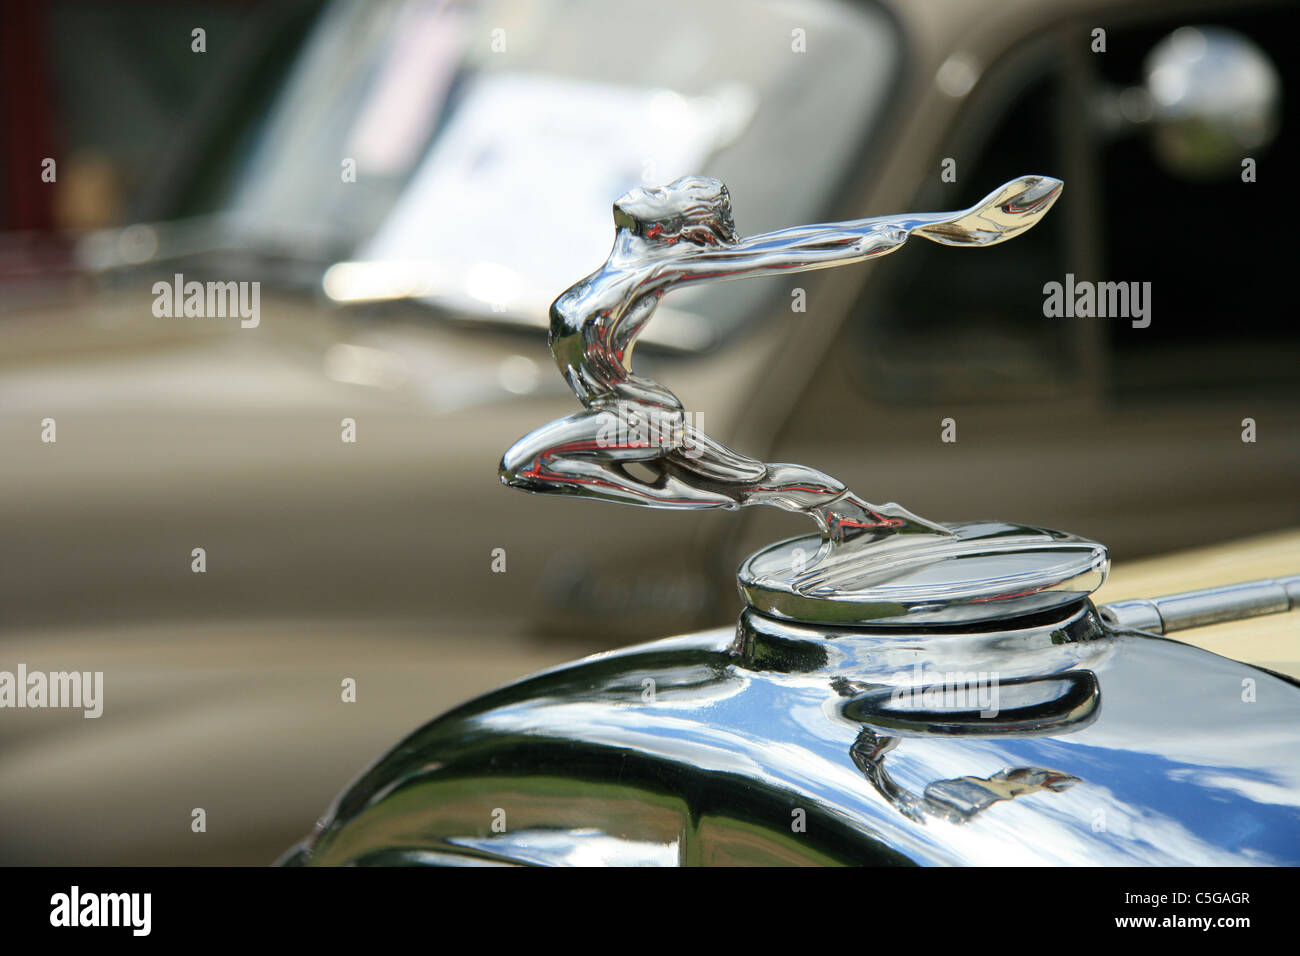 Car Photo, Classic Car, Hood Ornament, Gift for Dad, Antique Car, Old Cars,  Buick, Gift for Car Lovers, Vintage Cars, 1935 Buick Victoria